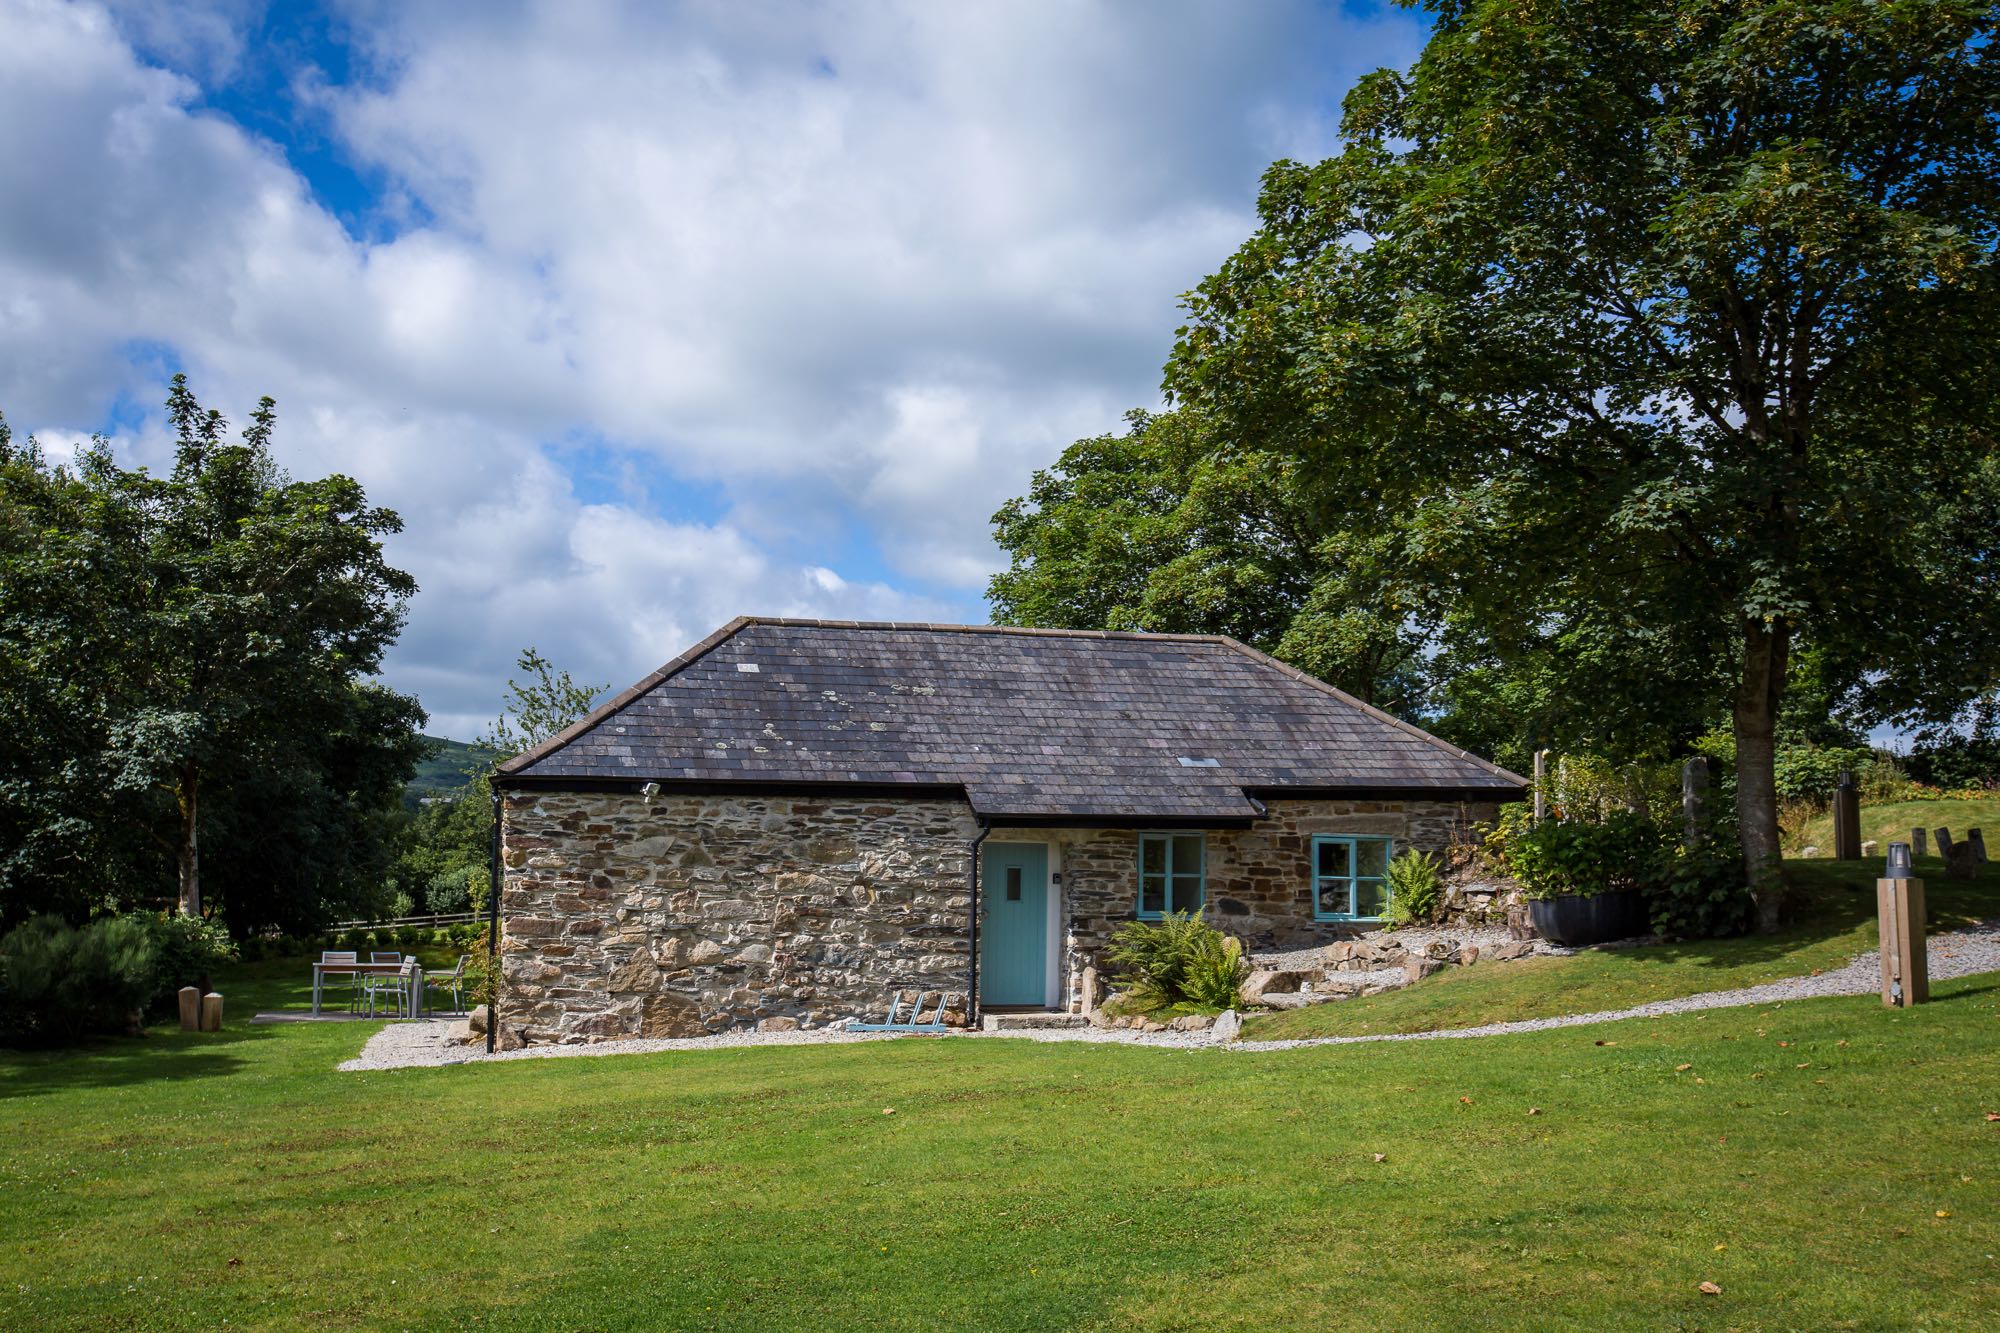 This picture shows cottage number two which is a detached cottage that sleeps 4 people. The cottage is in the middle of the image and there are lawns in front and a blue cloudy sky above. There are trees in leaf to the left and to the right. The cottage is built of local granite stone which is brown and grey in colour. It has a grey slate roof the main roof line runs from left to right along the length of the photograph. In the middle of the building there is the front doorthat is painted pale blue. On the right of the door there are 2 georgian style sash window also painted blue.